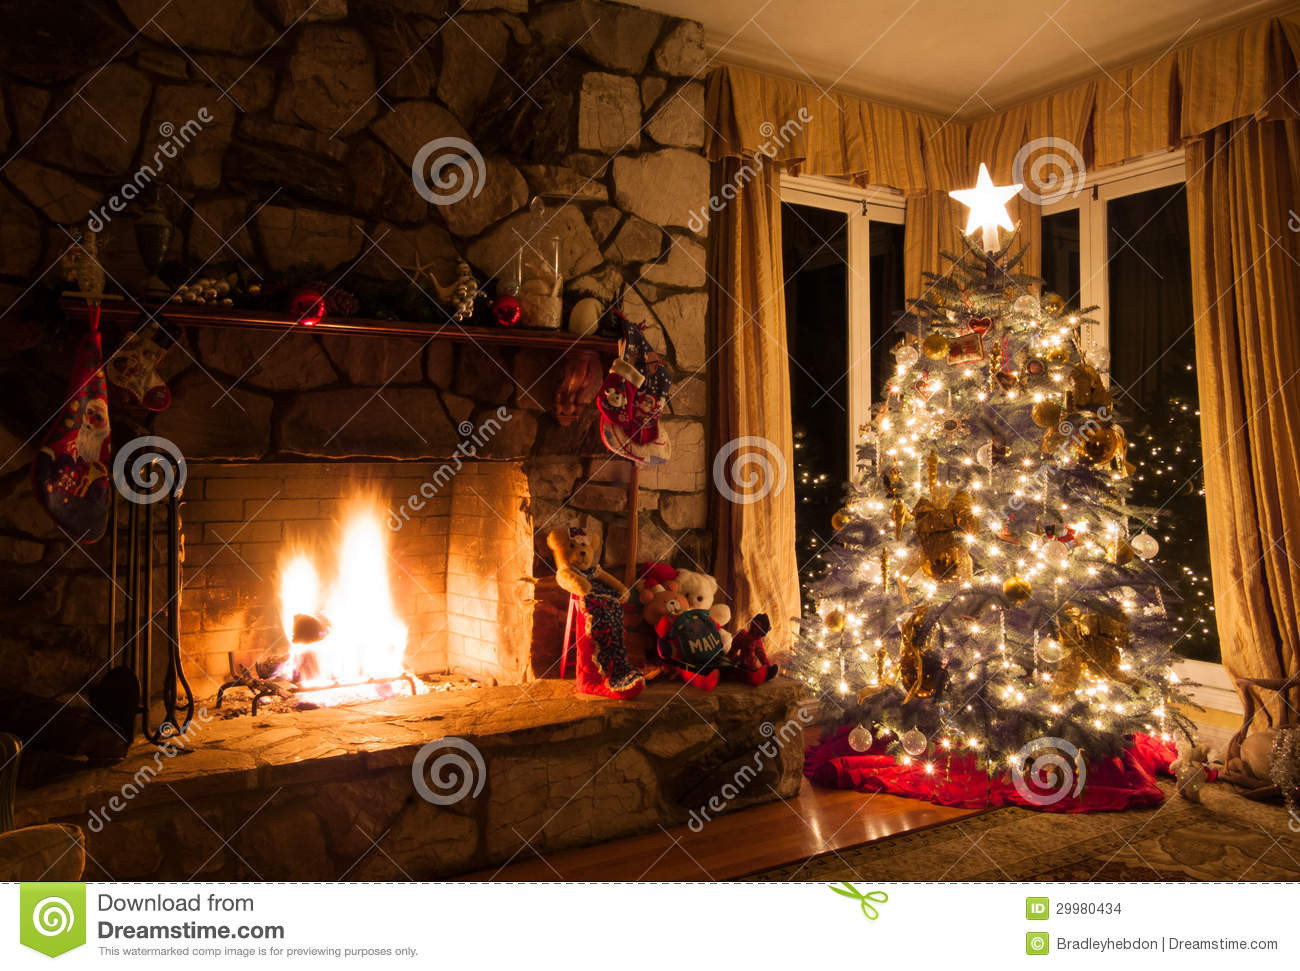 Christmas Tree Next To Fireplace
 Christmas Tree And Rustic Fireplace In A Cozy Home Stock